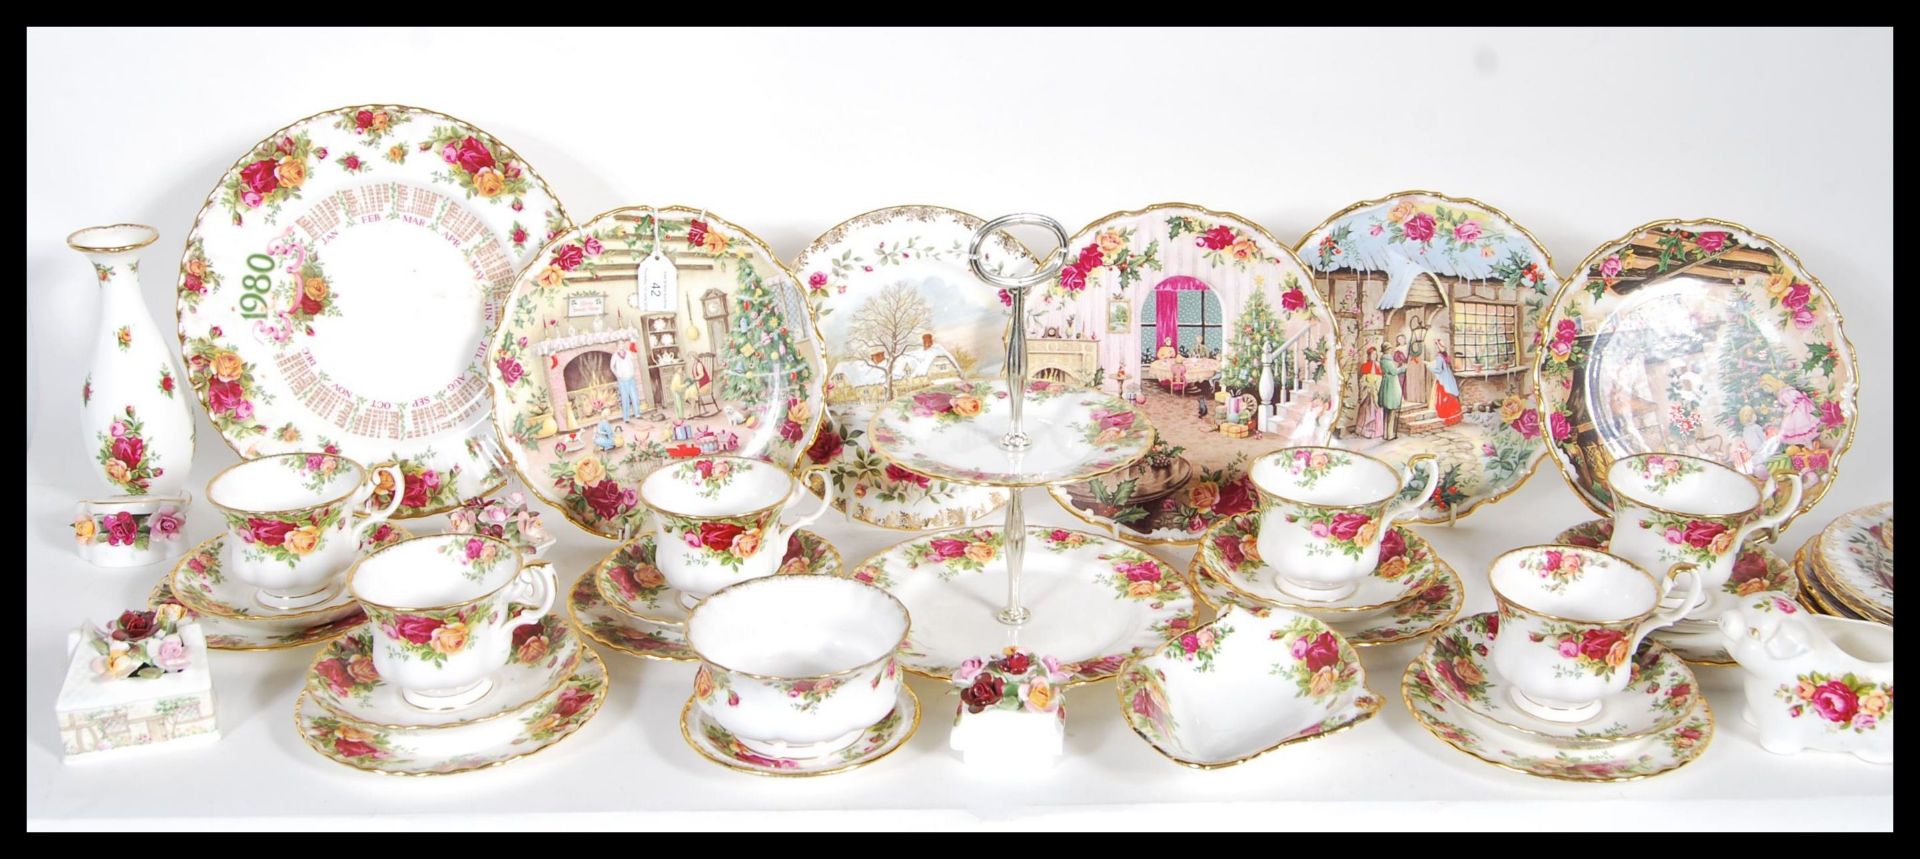 A Royal Albert Old Country Roses tea service consisting of cups, saucers, side plates, sugar bowl